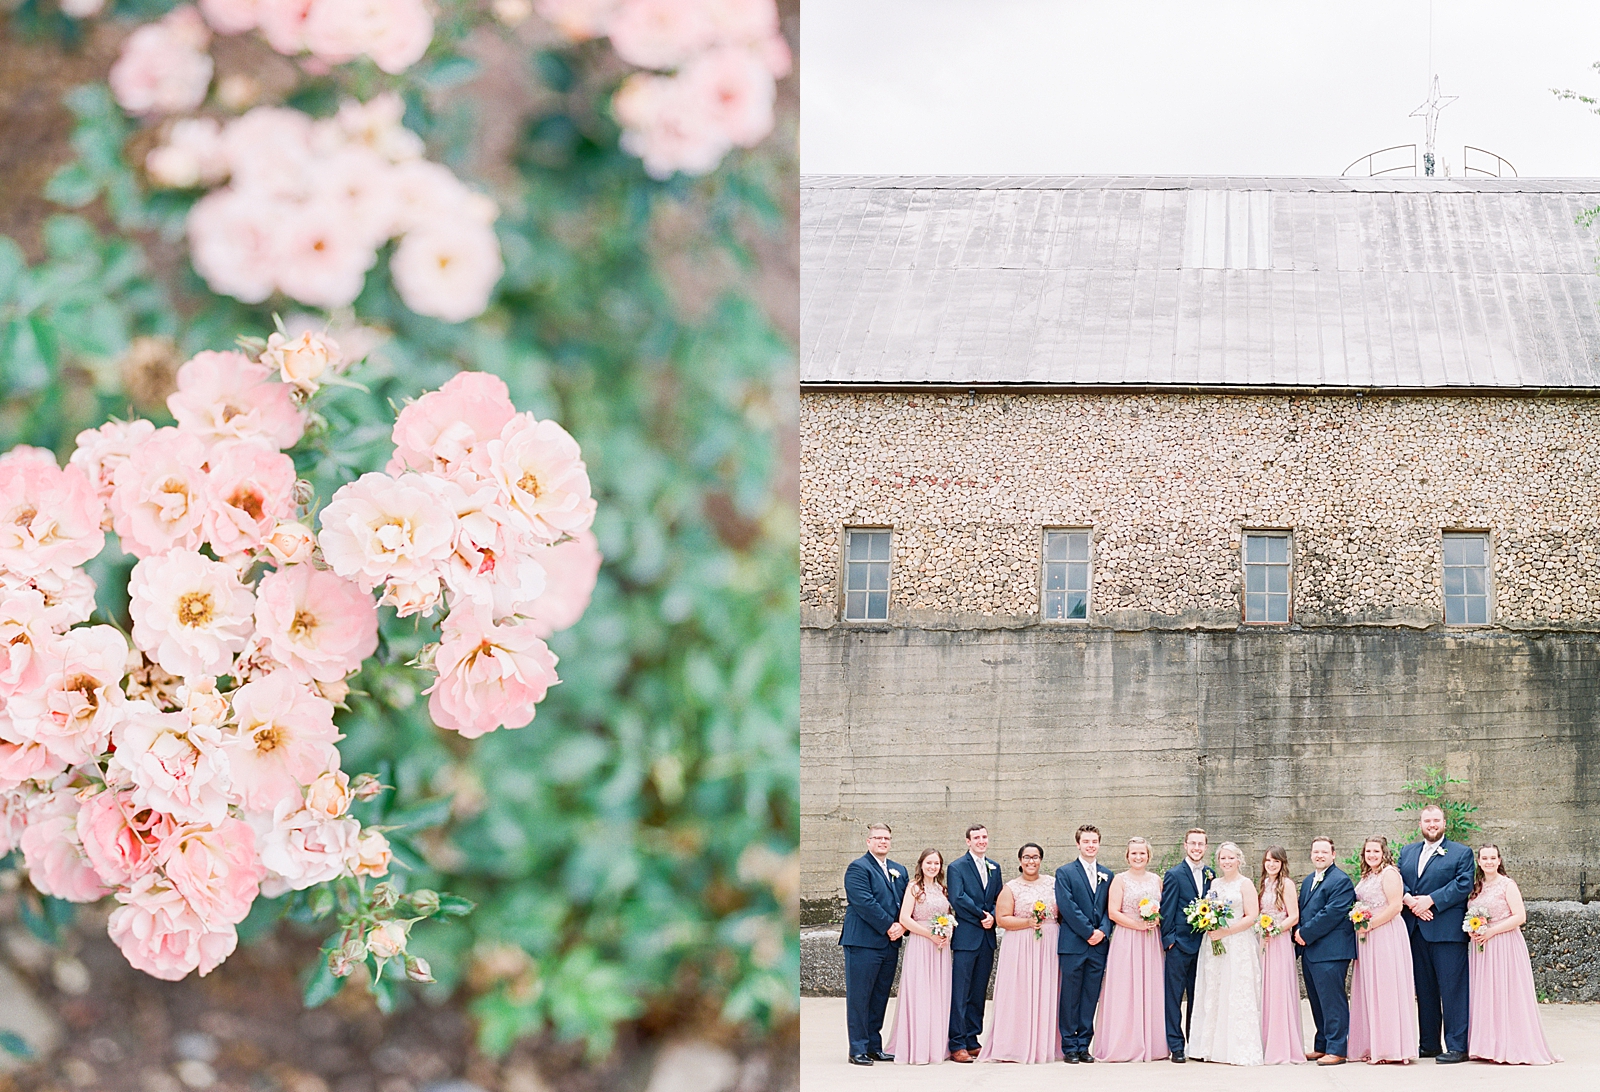 Black Fox Farms Garden Wedding Pink Flowers Detail and Bride and Groom with Wedding Party in Front of Old Building Photos